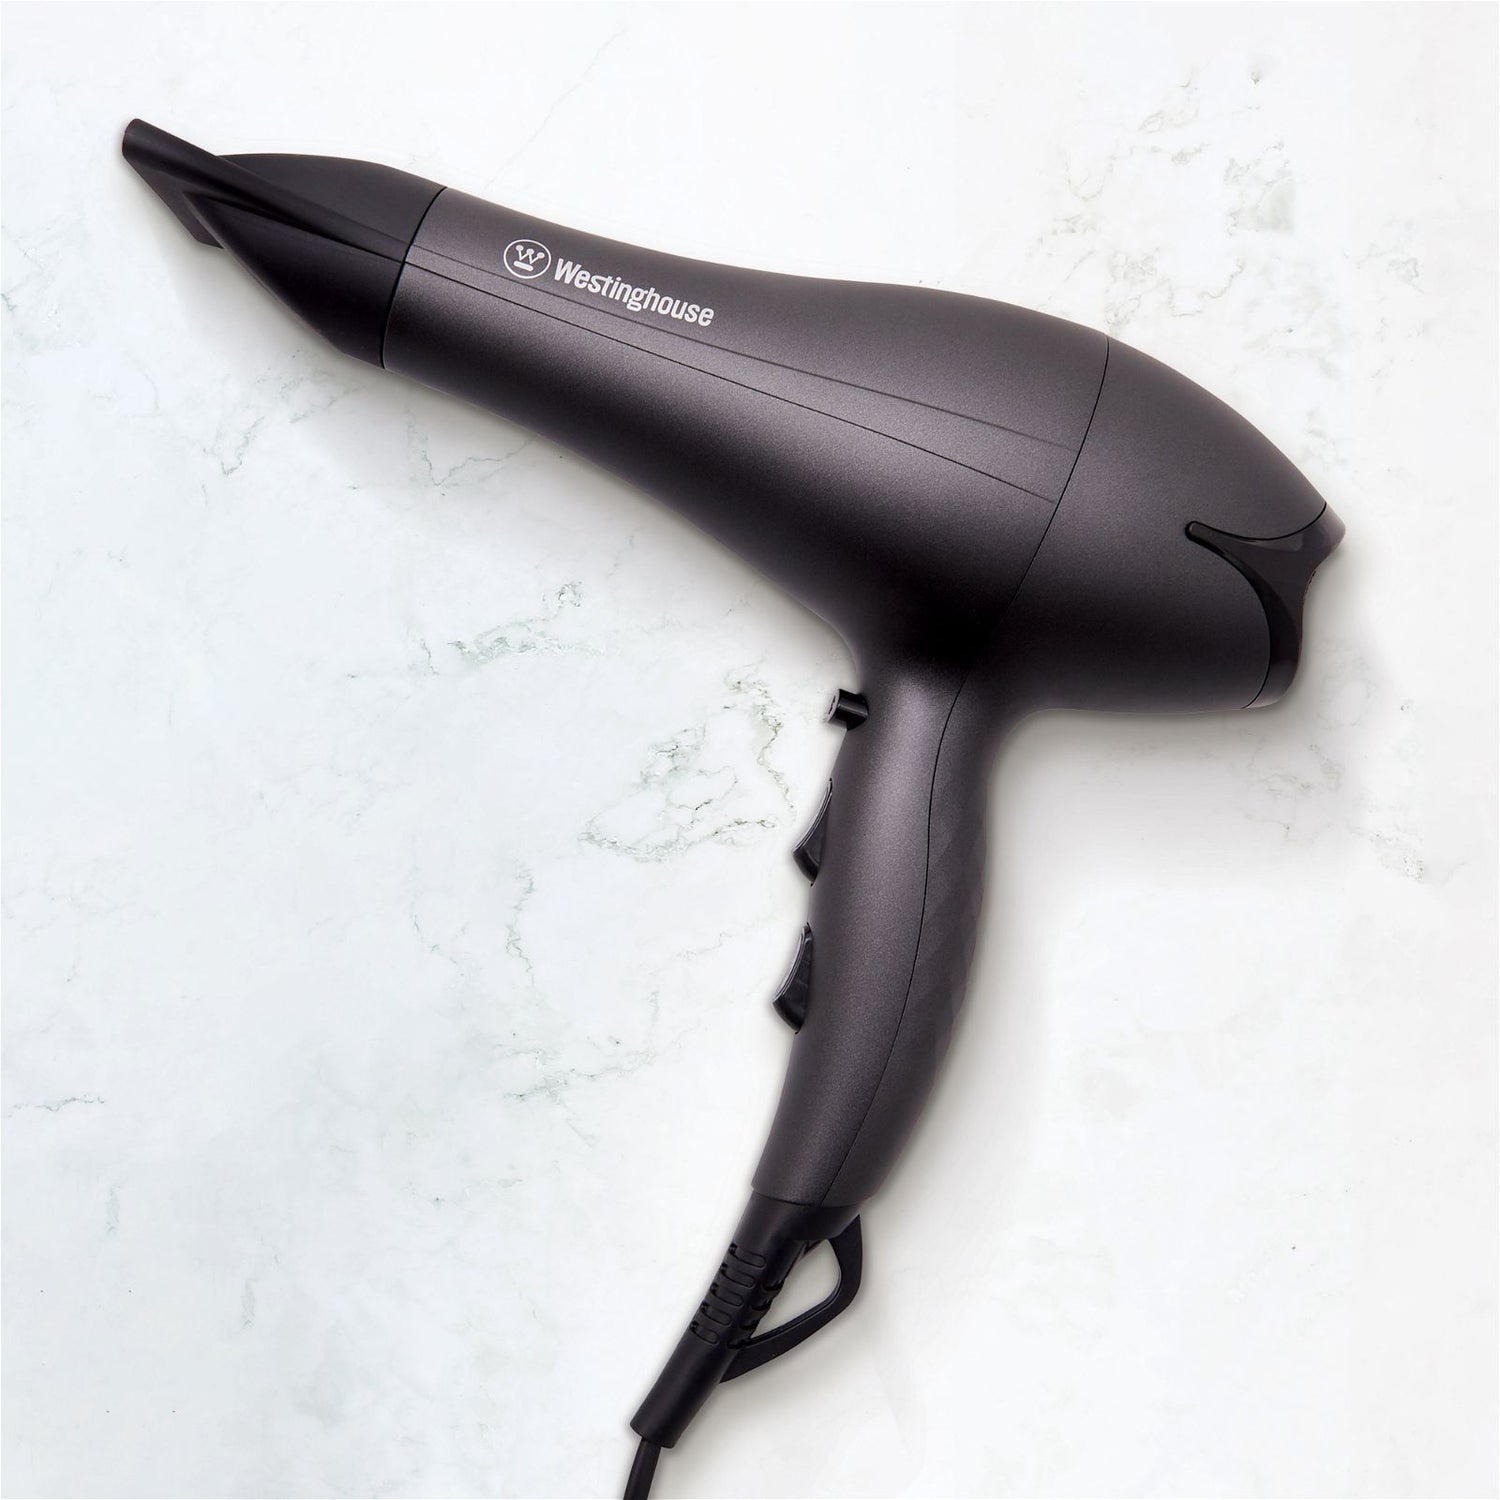 Westinghouse 2400W Ionic Anti-Frizz Hair Dryer with Cold Shot-#product_category#- Distributed by: RVM under license